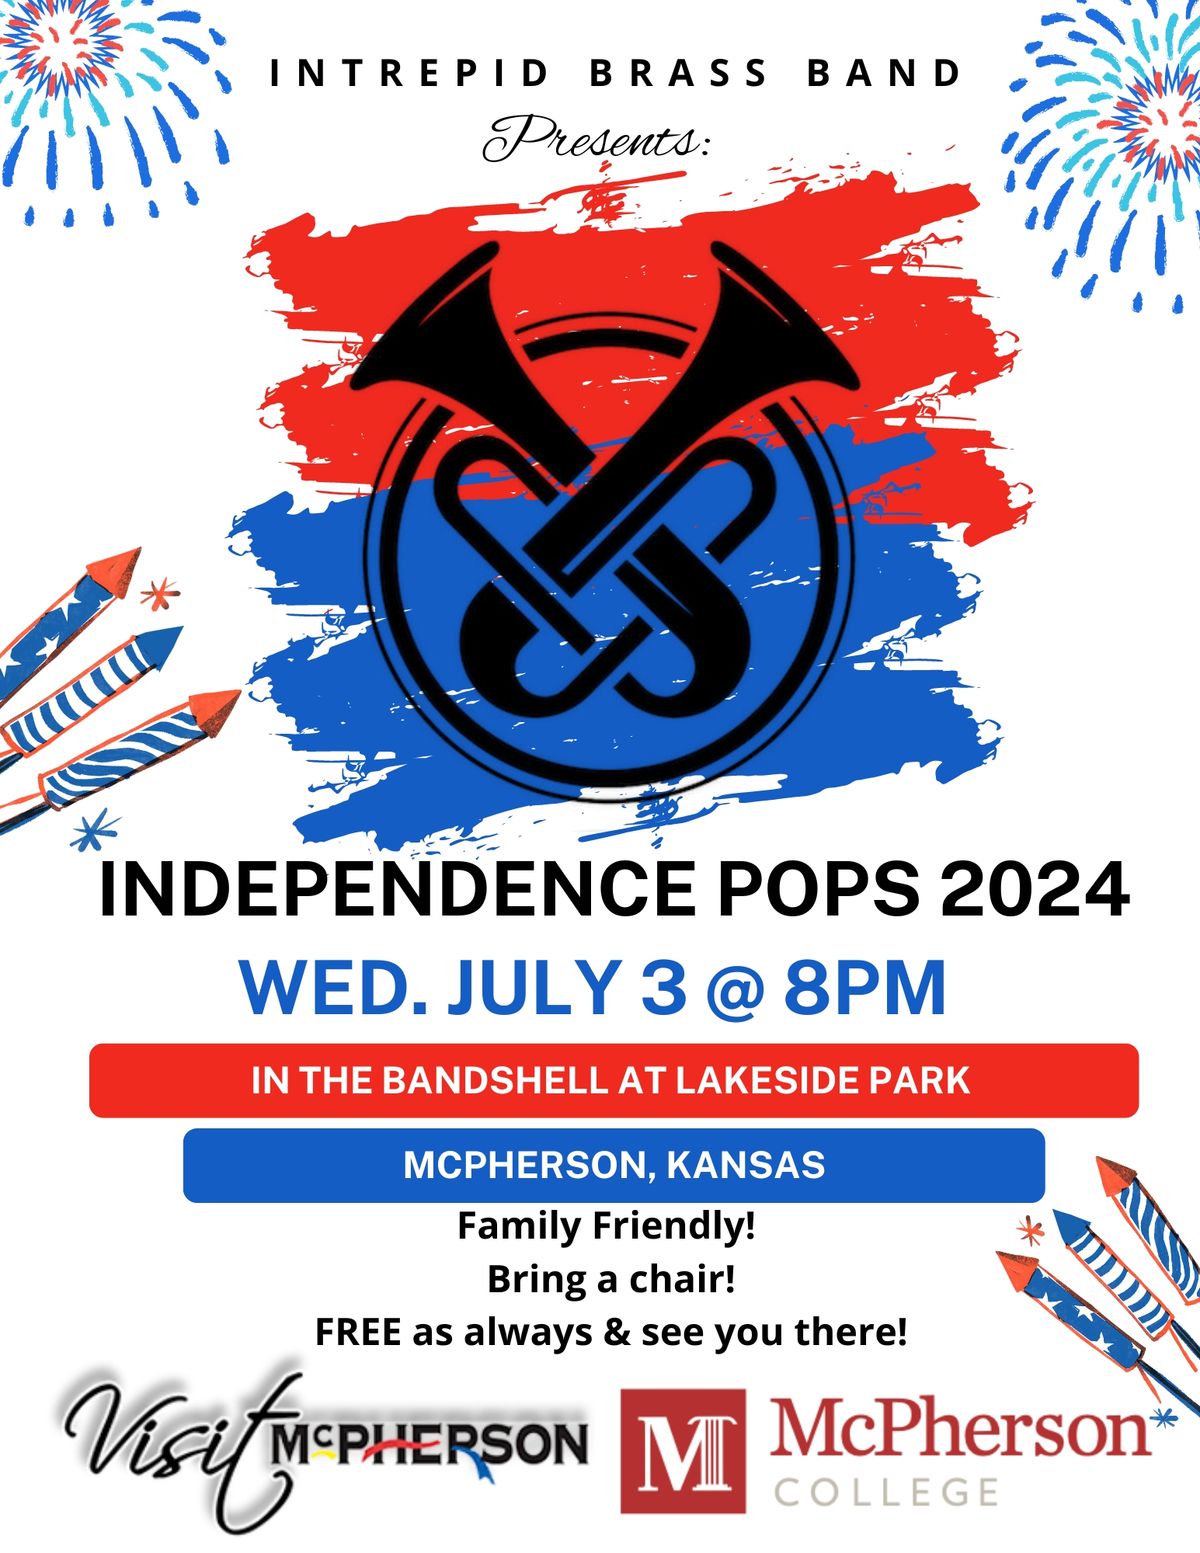 IBB presents "Independence Pops 2024"